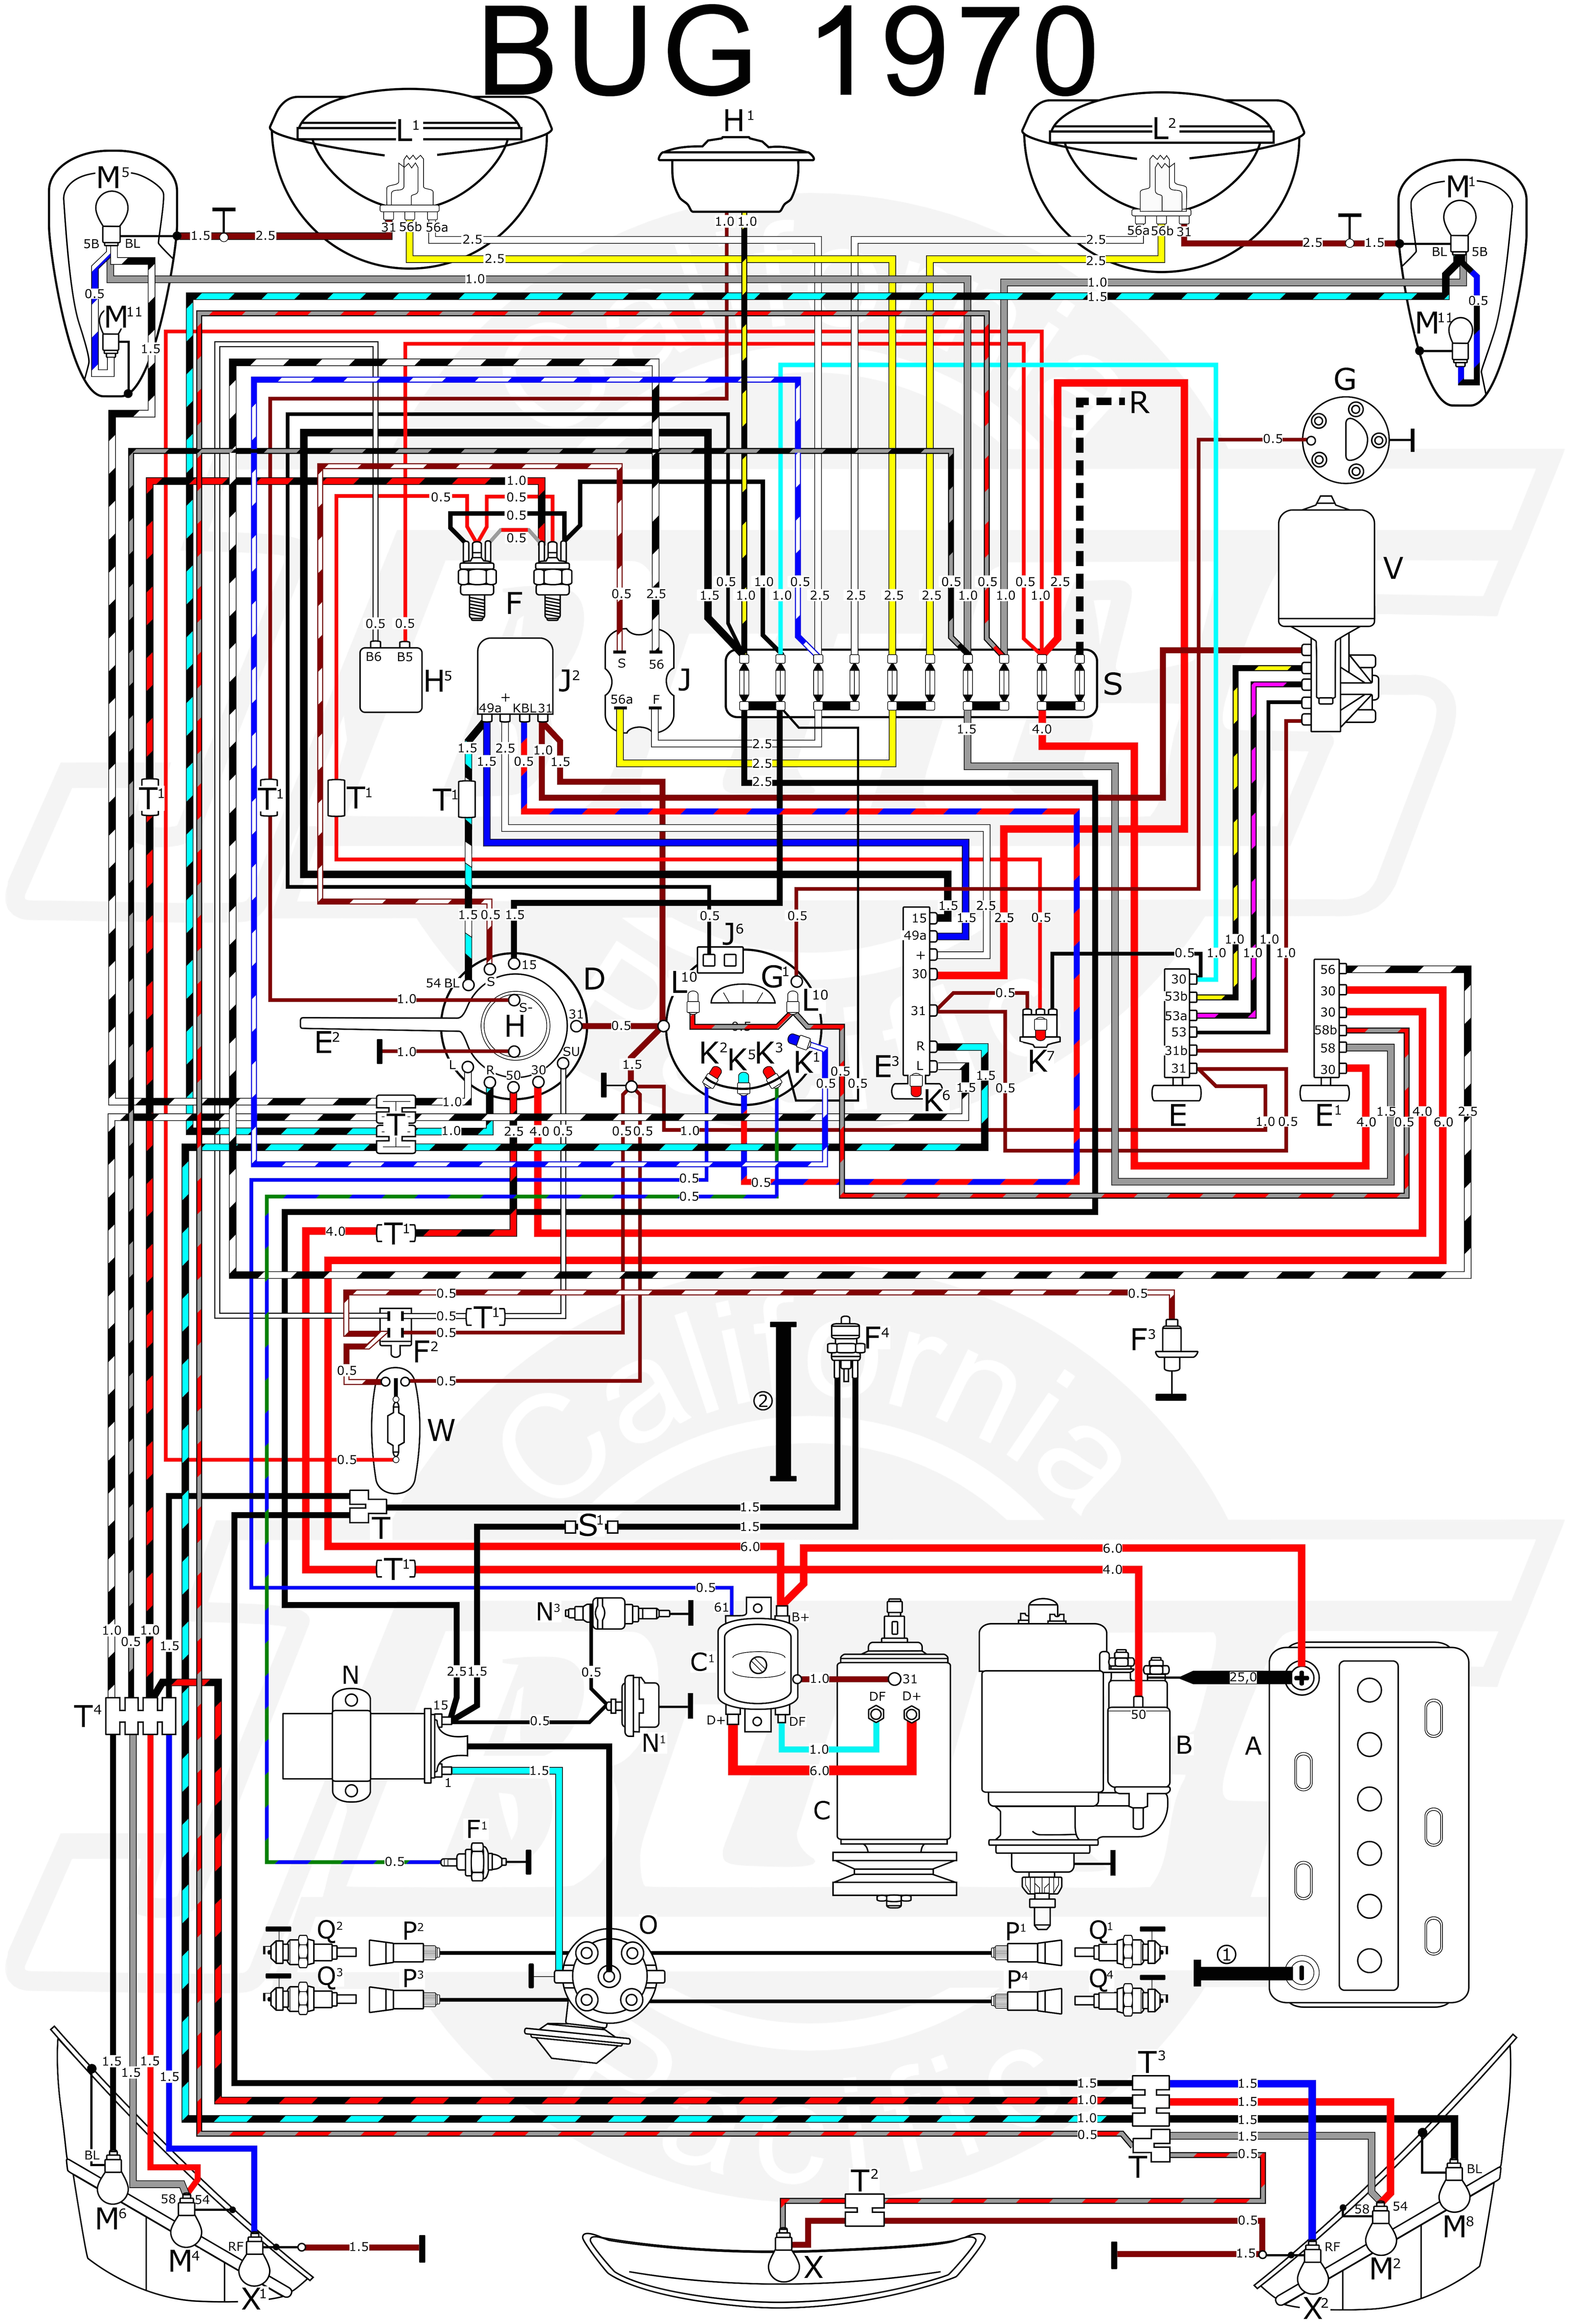 73 vw engine wiring harness wiring diagram view 1973 vw super beetle engine wiring diagram 1973 vw engine diagram